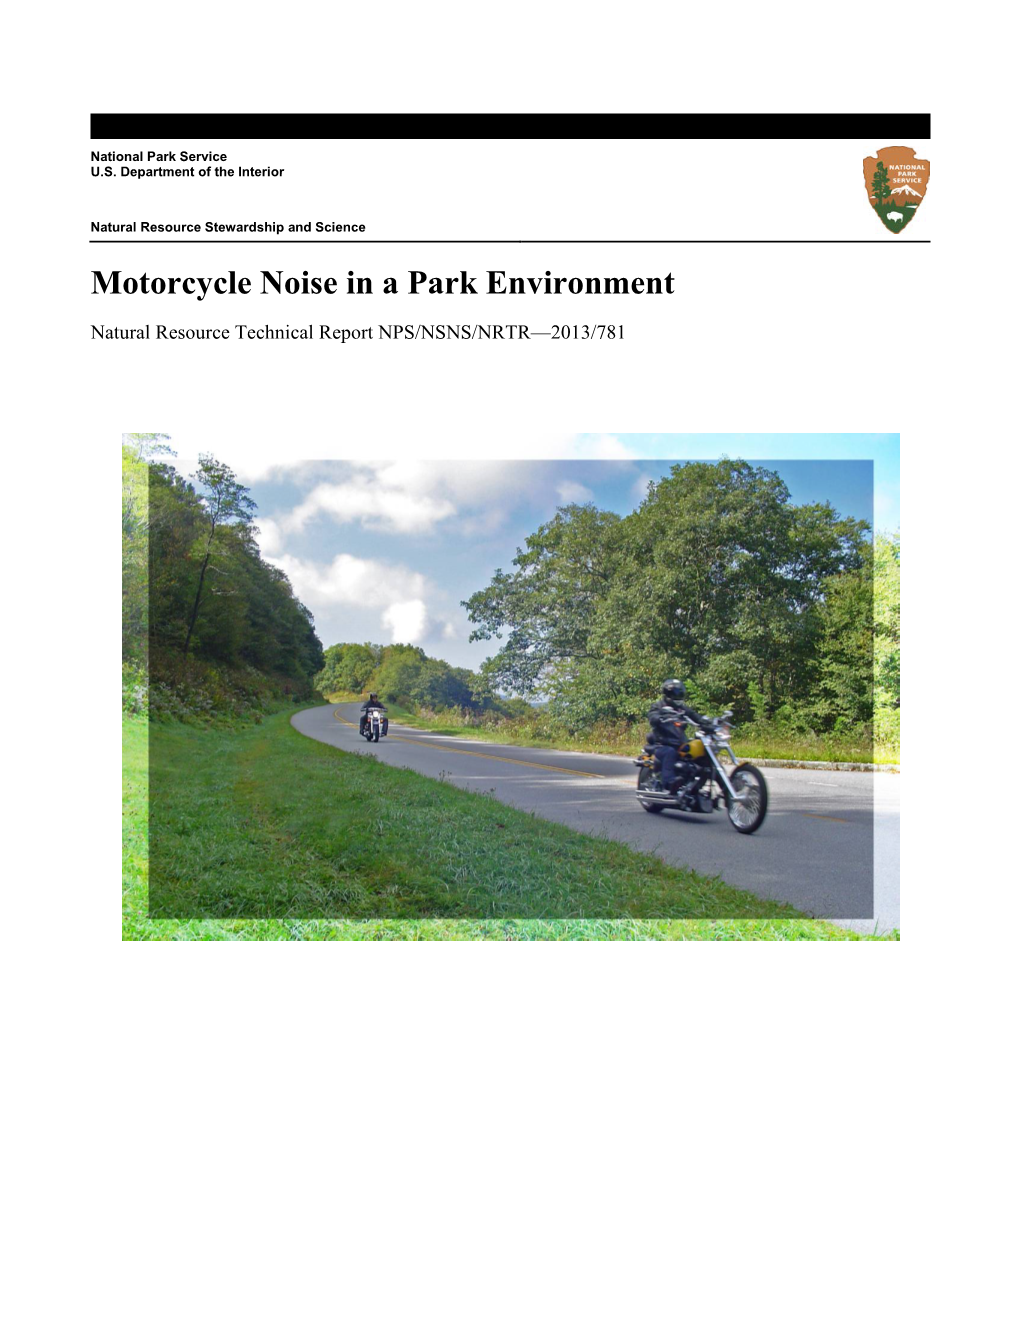 Motorcycle Noise in a Park Environment